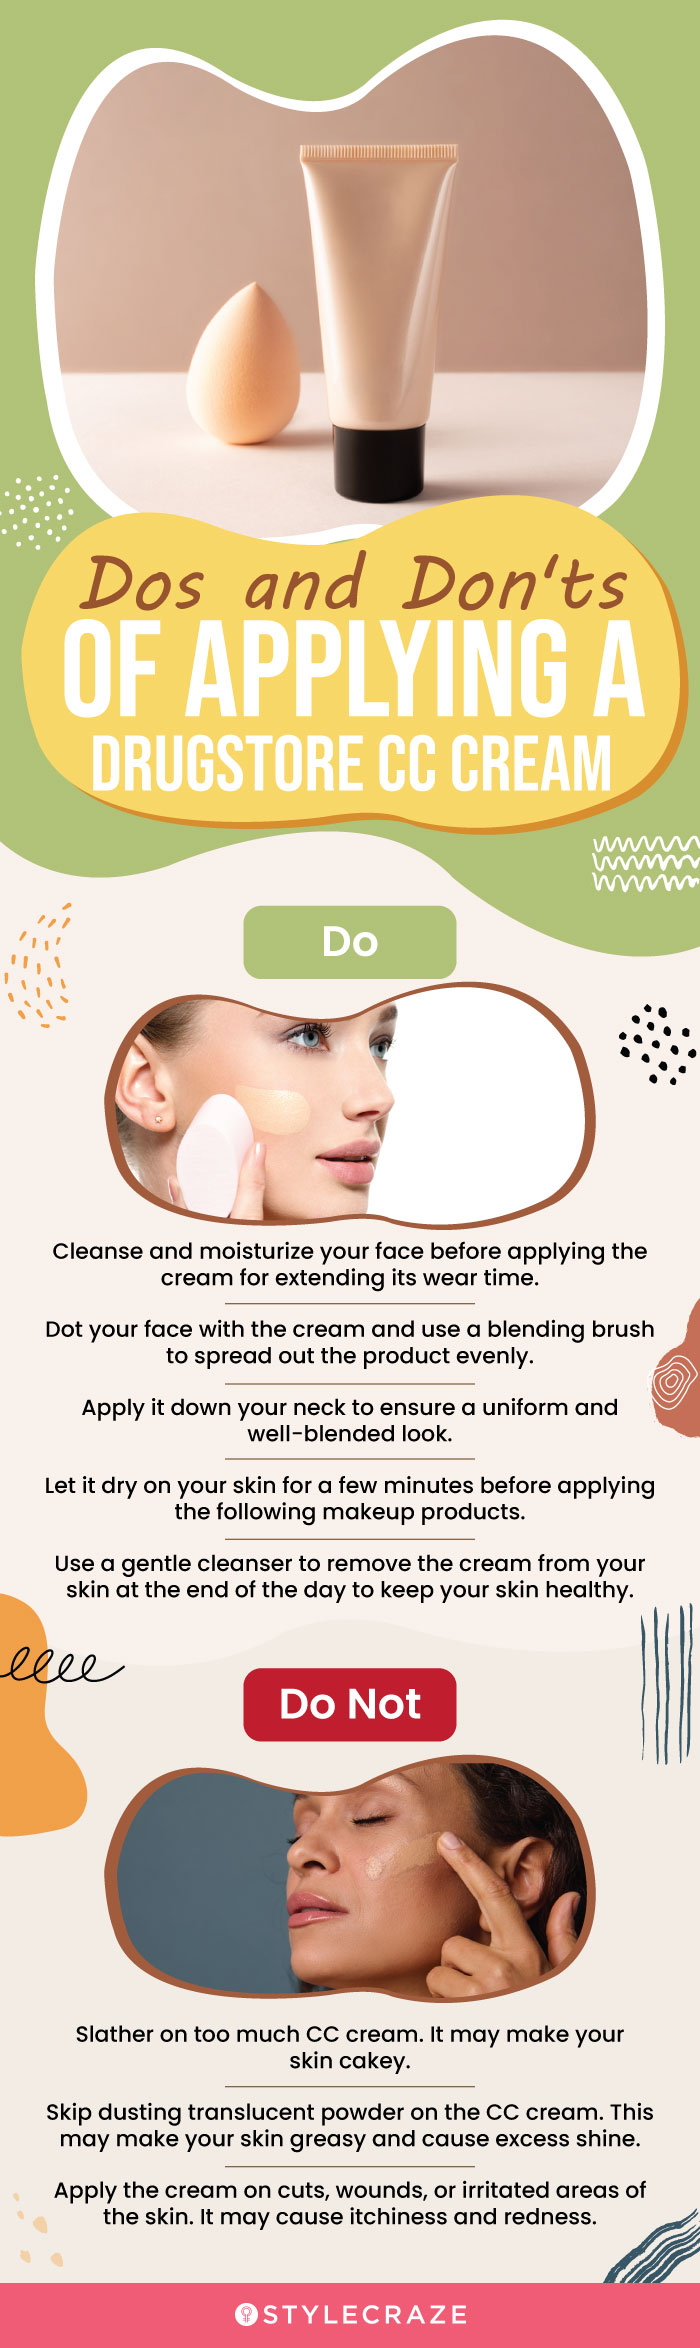 Dos And Don'ts Of Applying A Drugstore CC Cream (infographic)